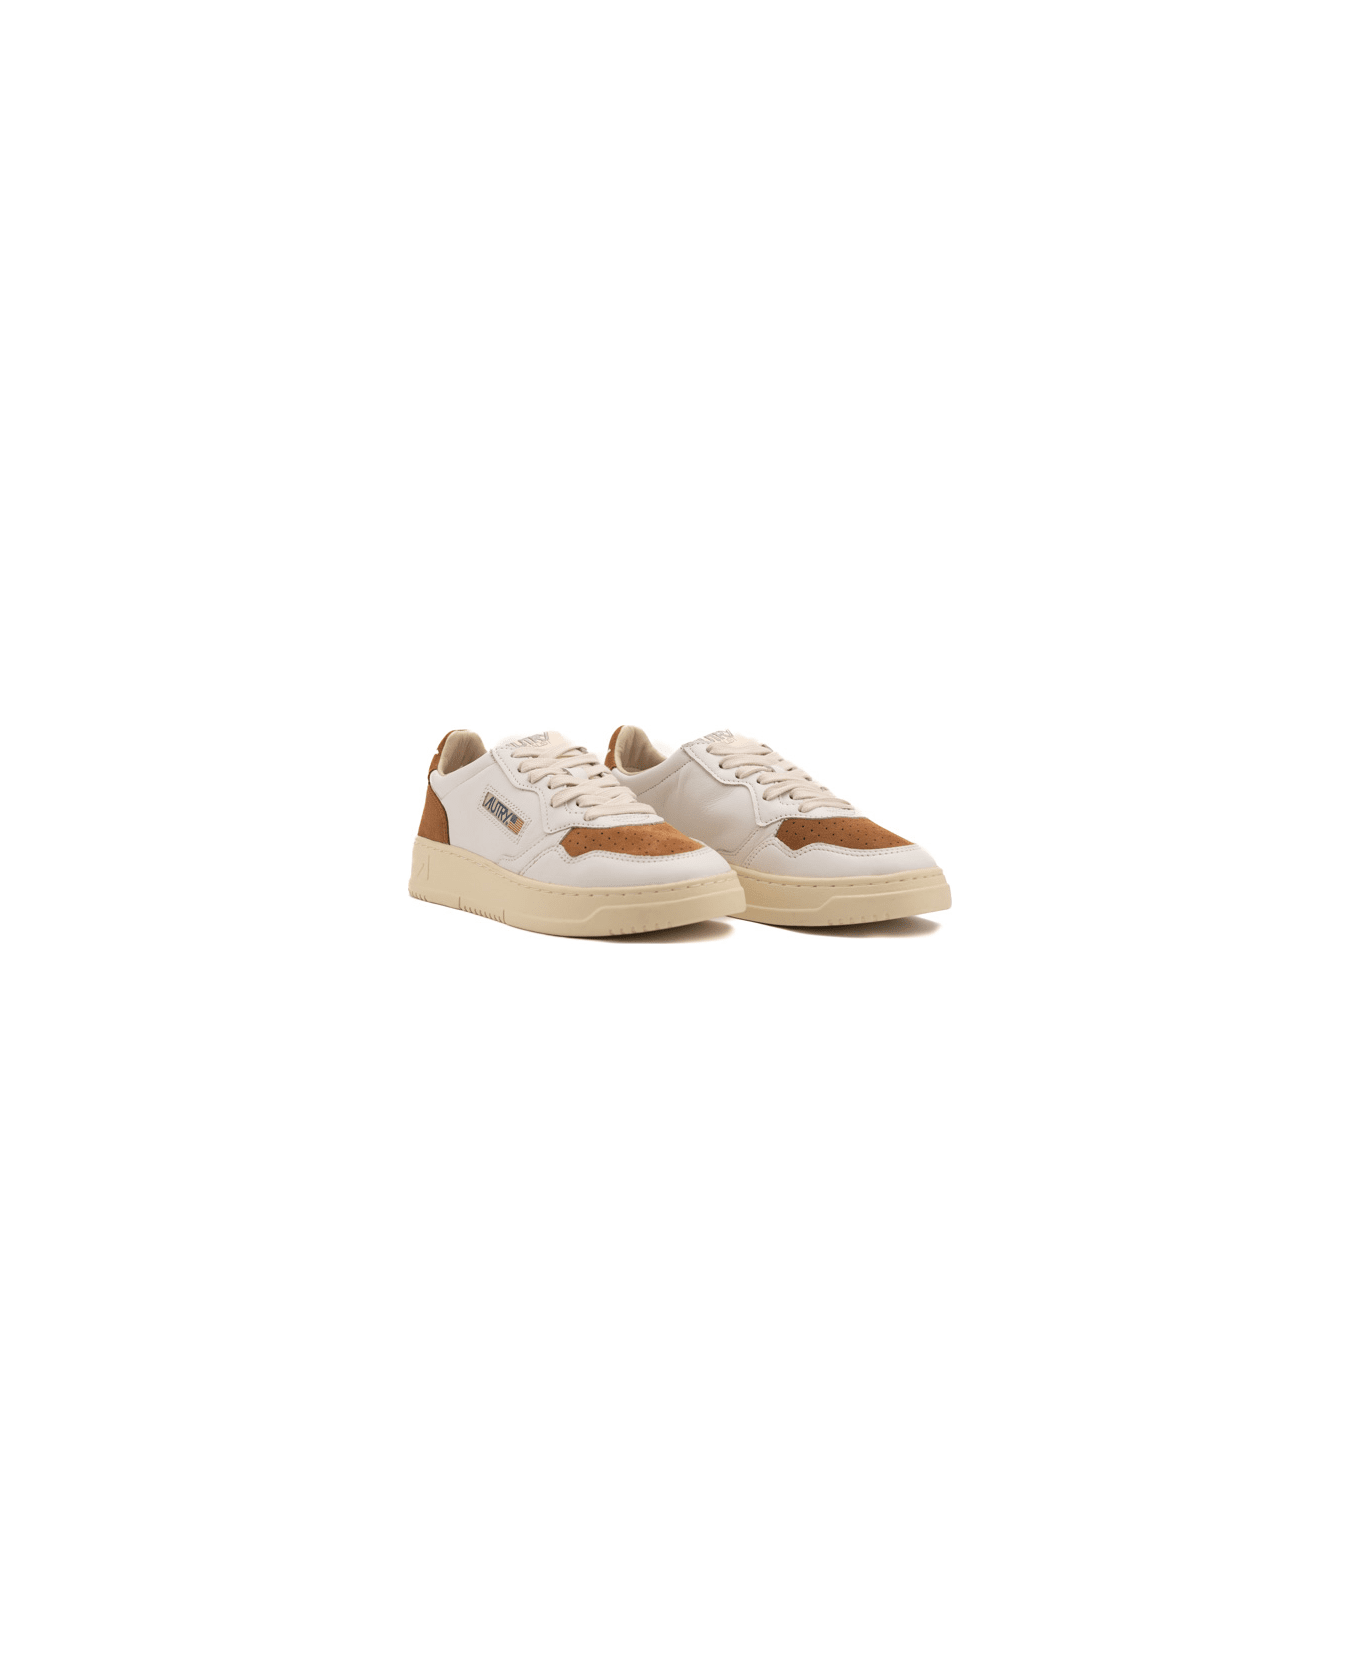 Autry Medalist Low Sneakers In White/caramel Leather And Suede - Wht/crml